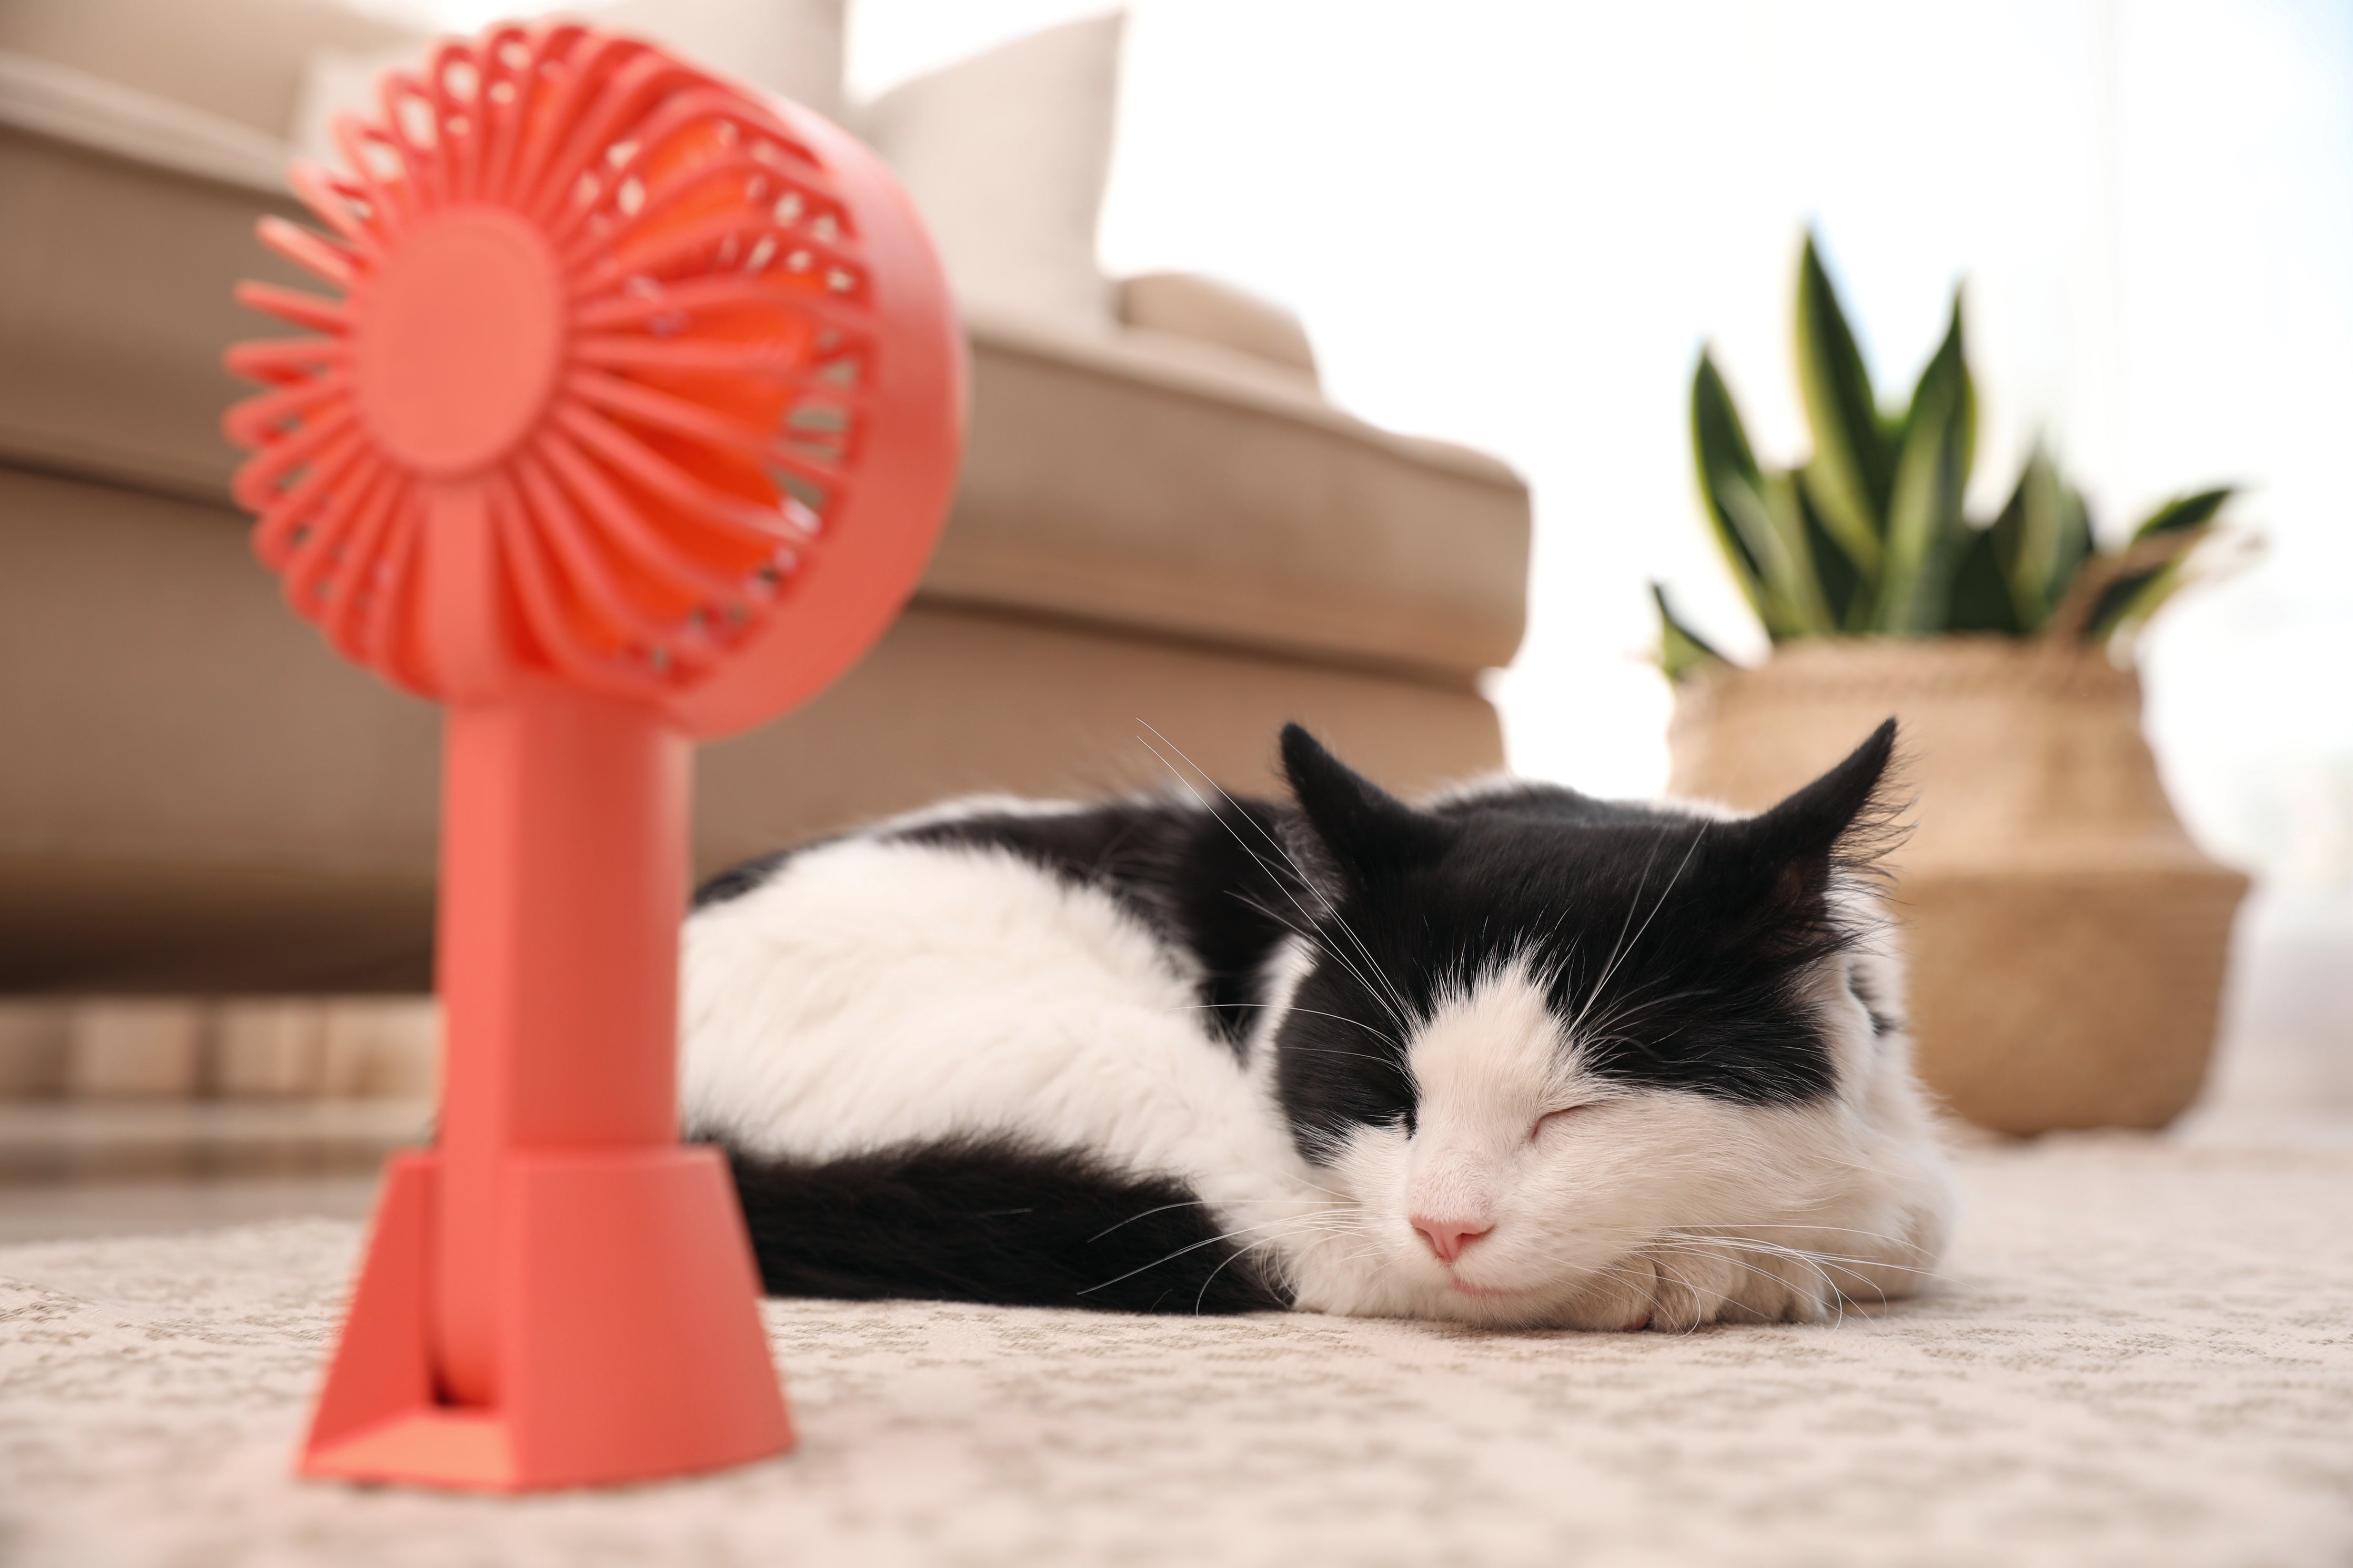 Tips to keep your cat cool in hot weather